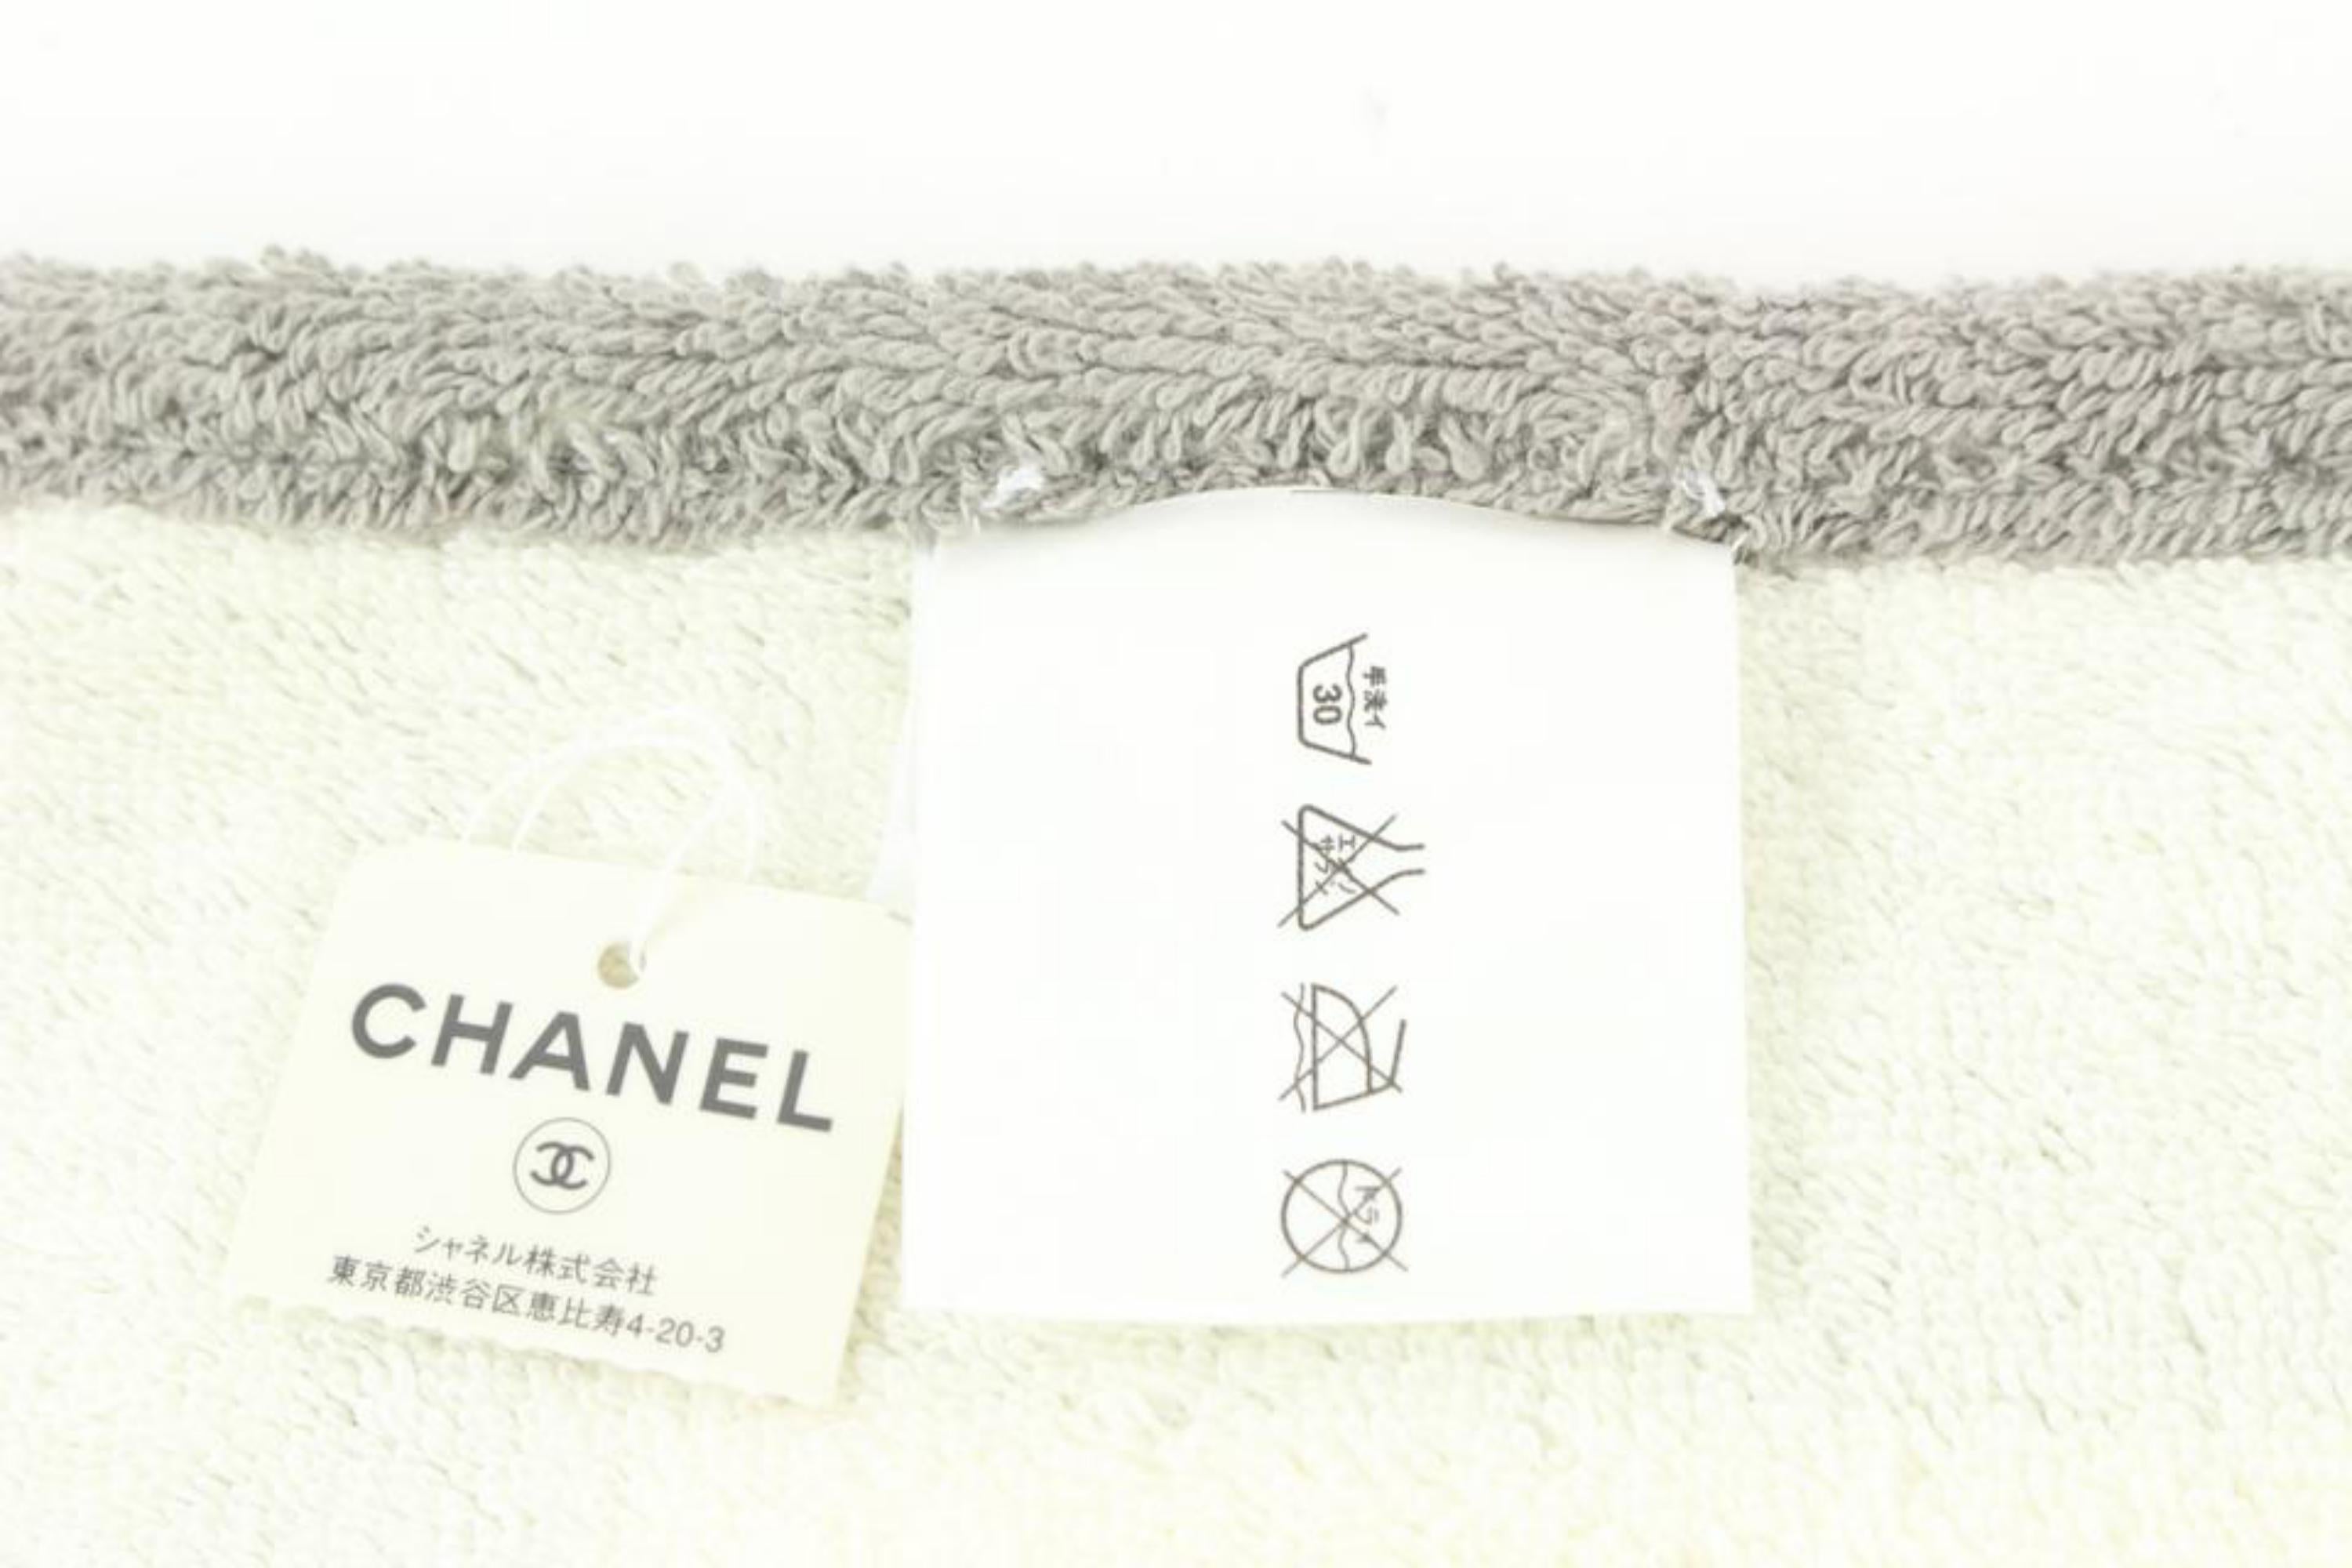 Chanel XL Grey Terry Cloth CC Sports Logo Beach Towel 46ck37s
Made In: France
Measurements: Length:  40.5